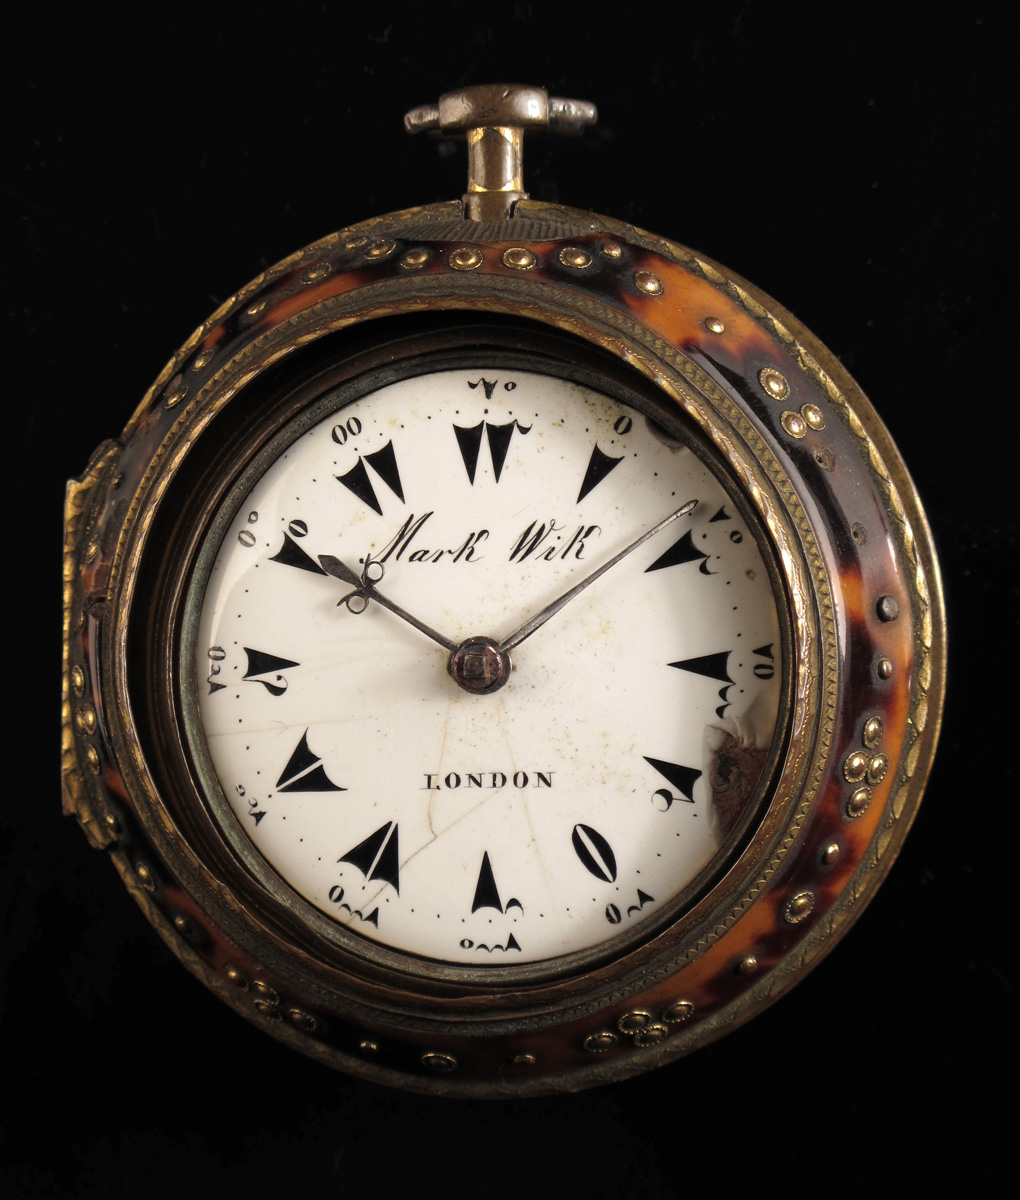 A gilt metal pair cased watch with Turkish dial, verge movement signed Henry Cox, London, associated